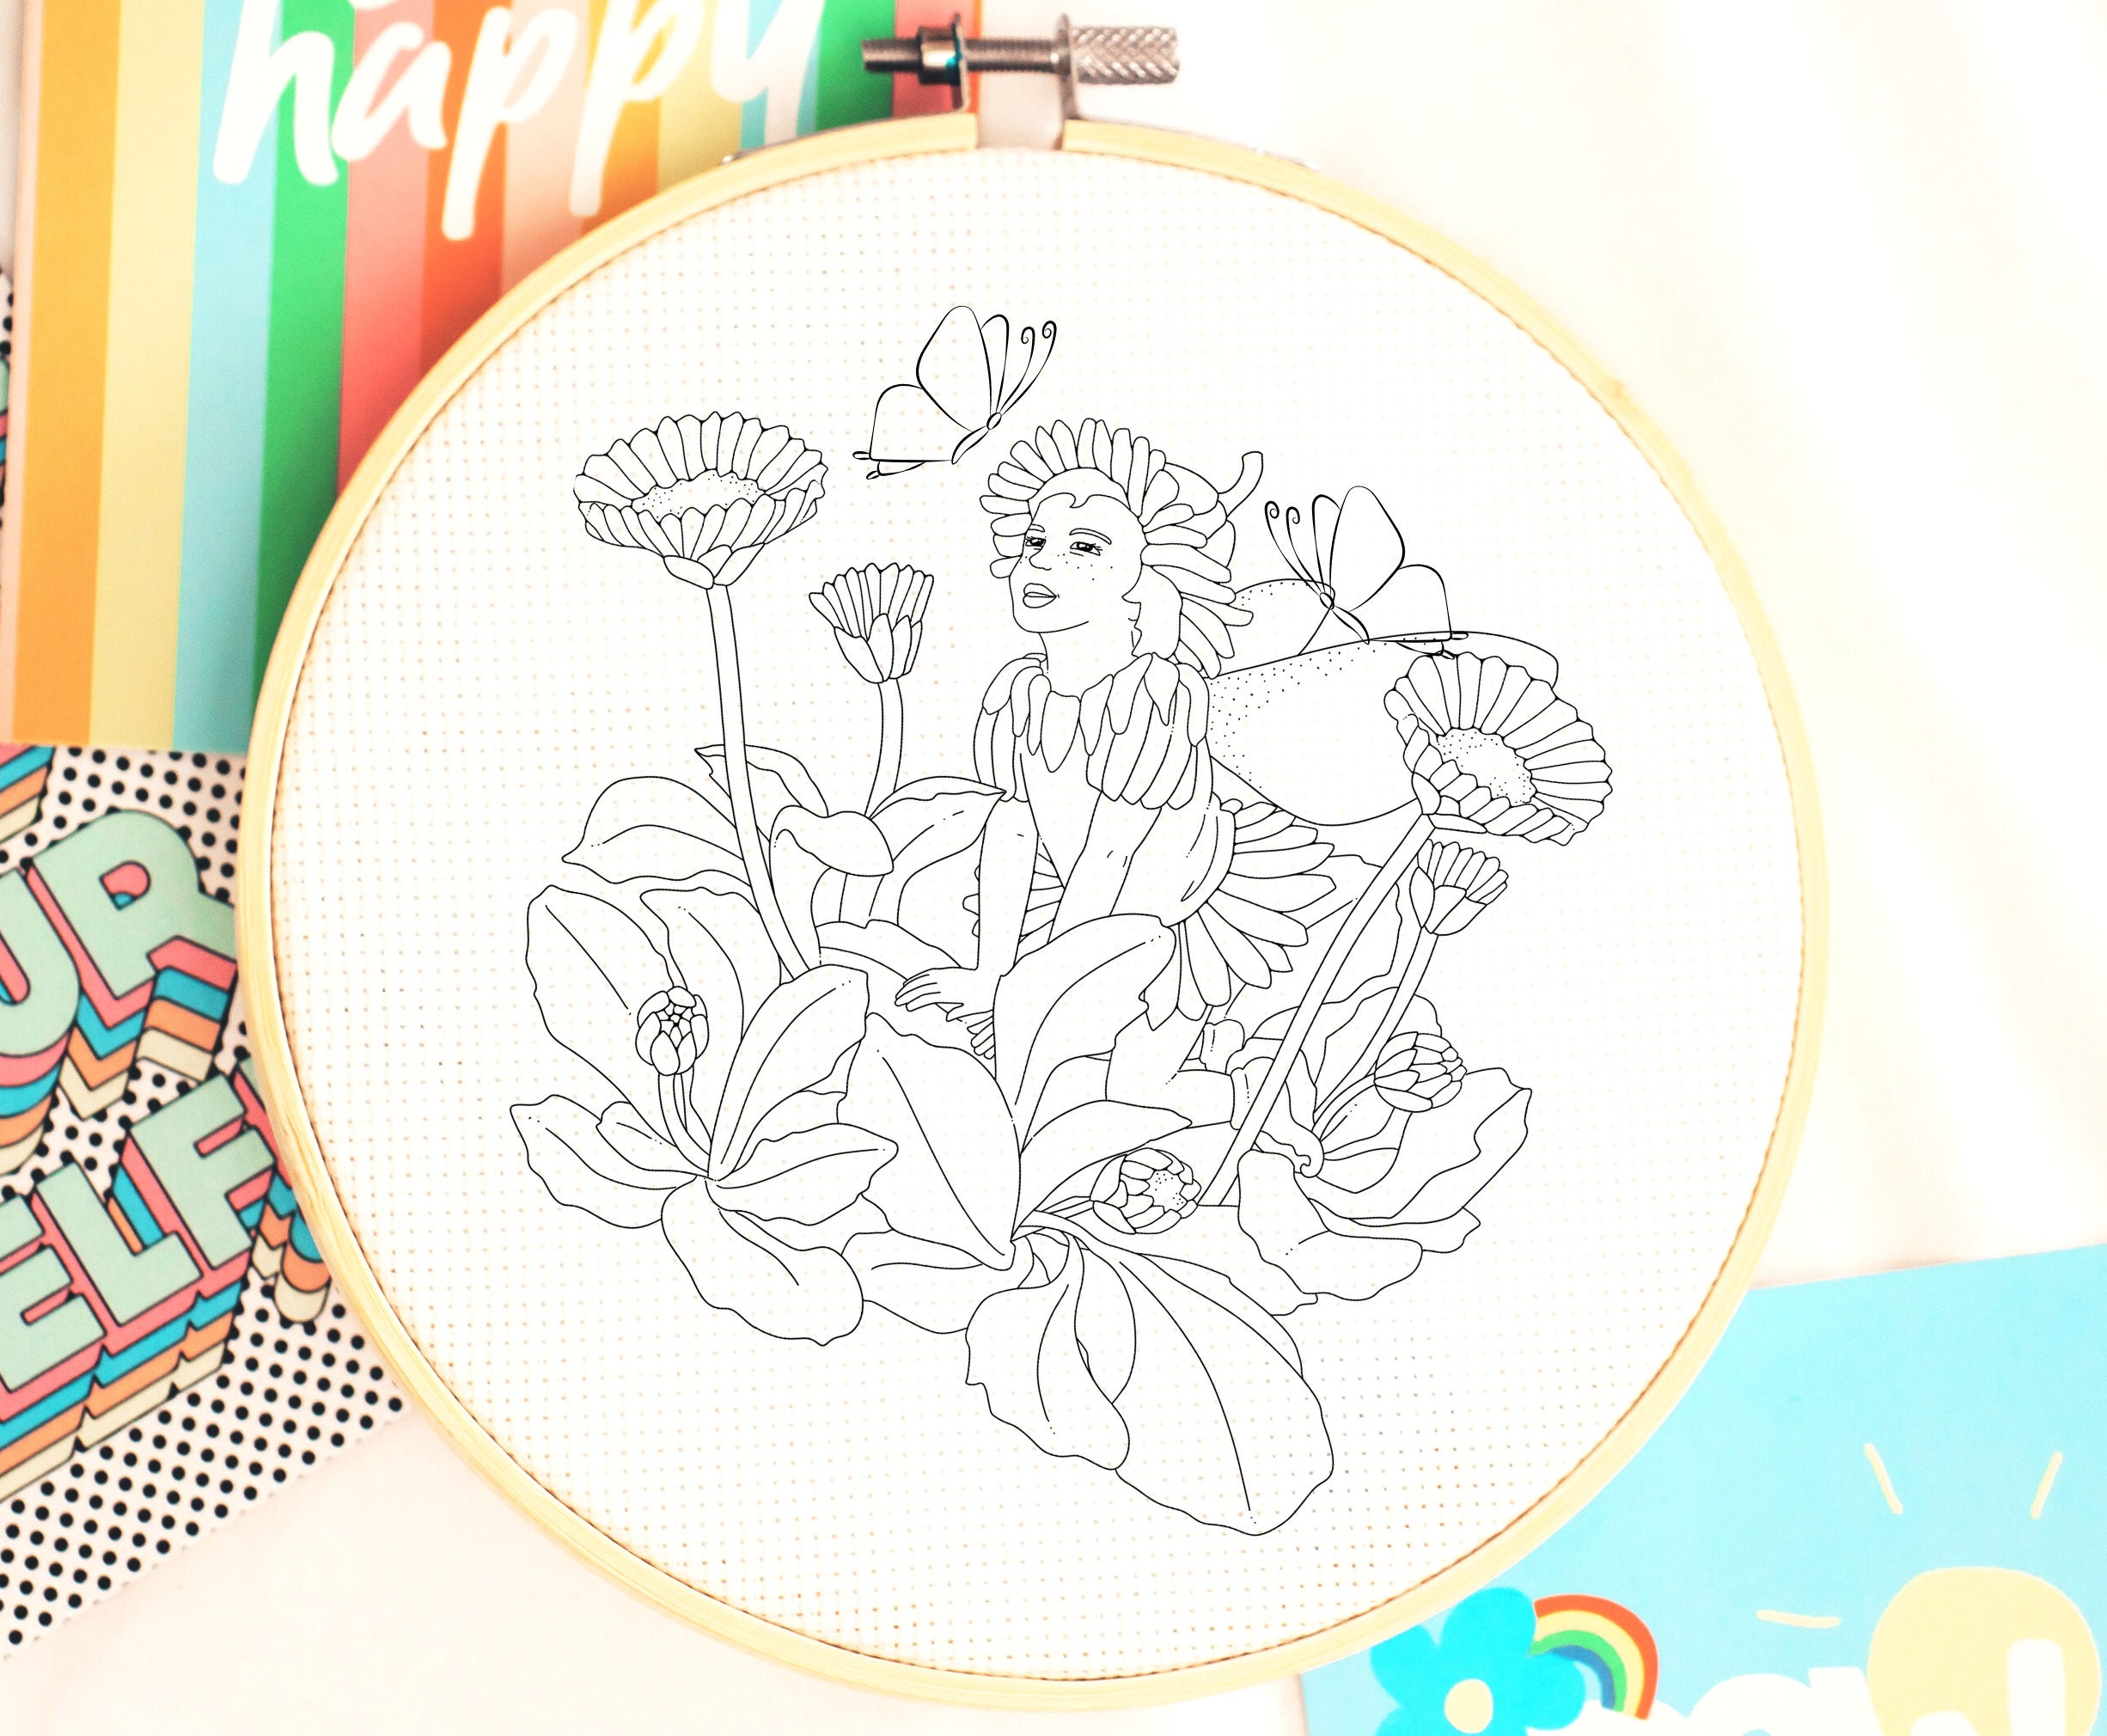 10 Resources for Free Hand Embroidery Patterns! - Create Whimsy